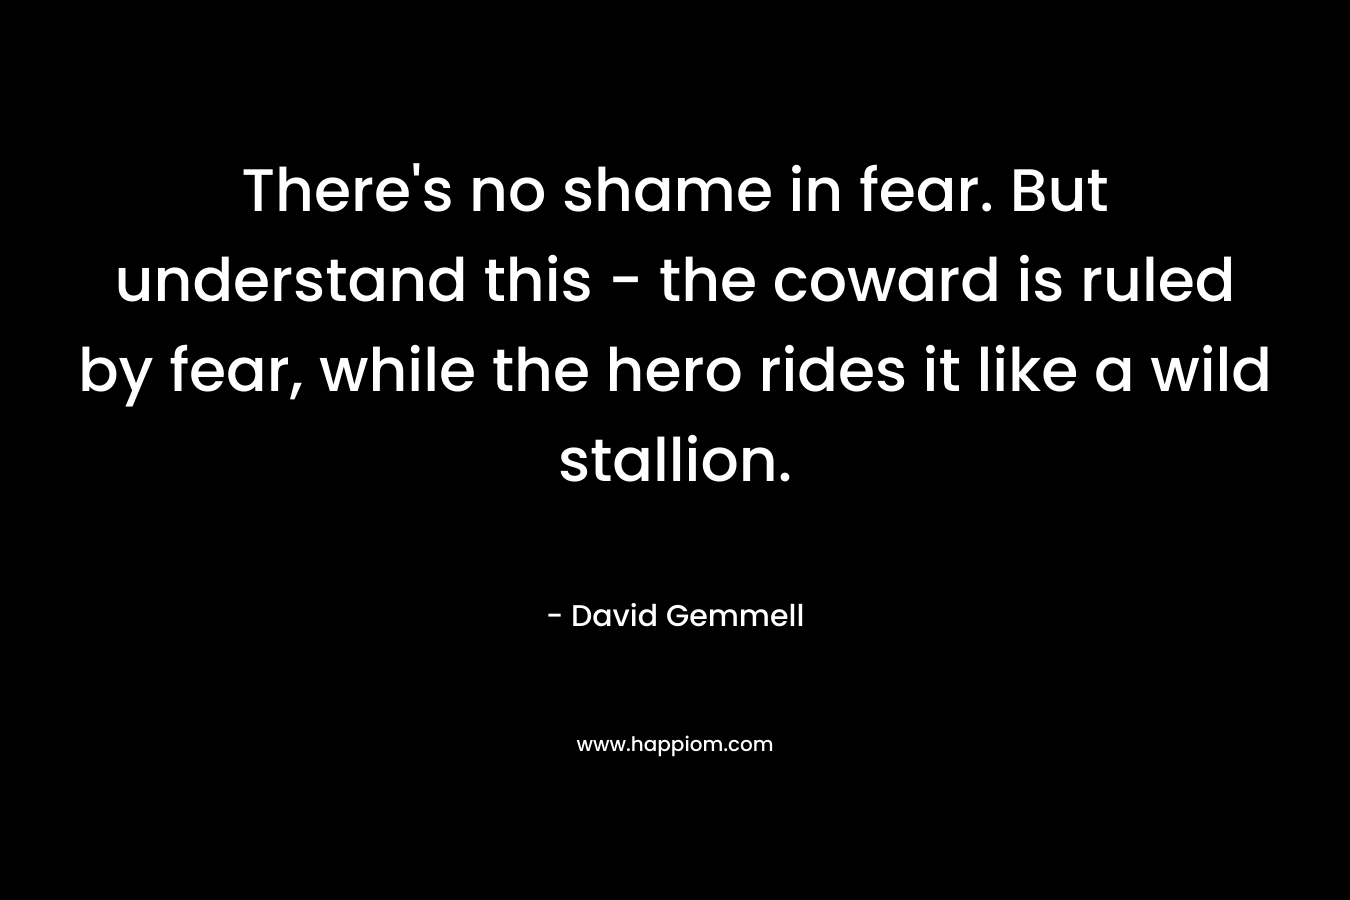 There's no shame in fear. But understand this - the coward is ruled by fear, while the hero rides it like a wild stallion.